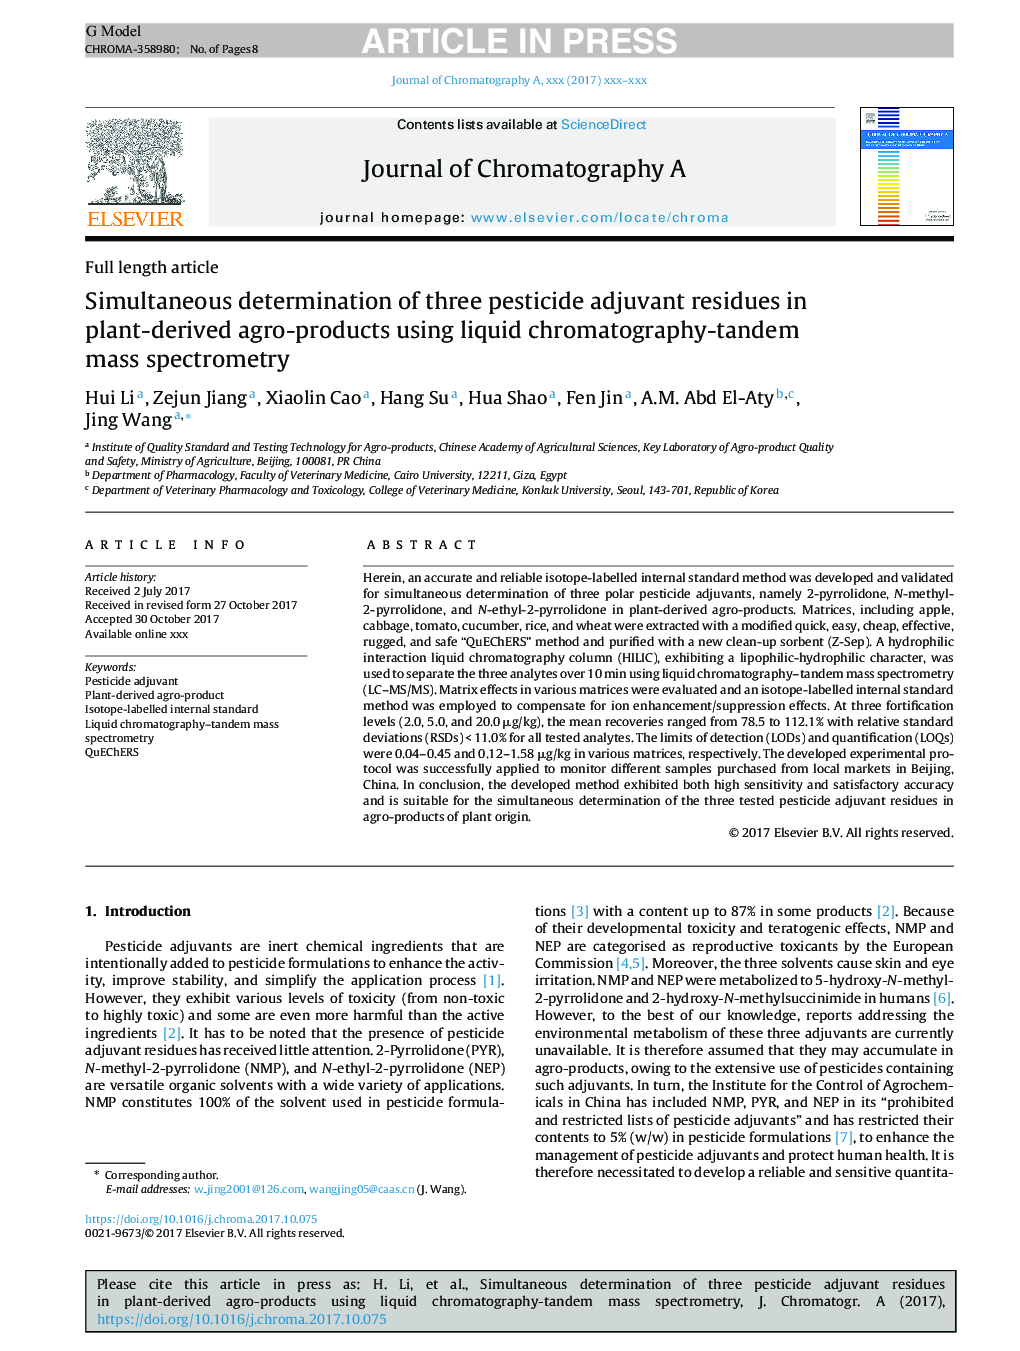 Simultaneous determination of three pesticide adjuvant residues in plant-derived agro-products using liquid chromatography-tandem mass spectrometry